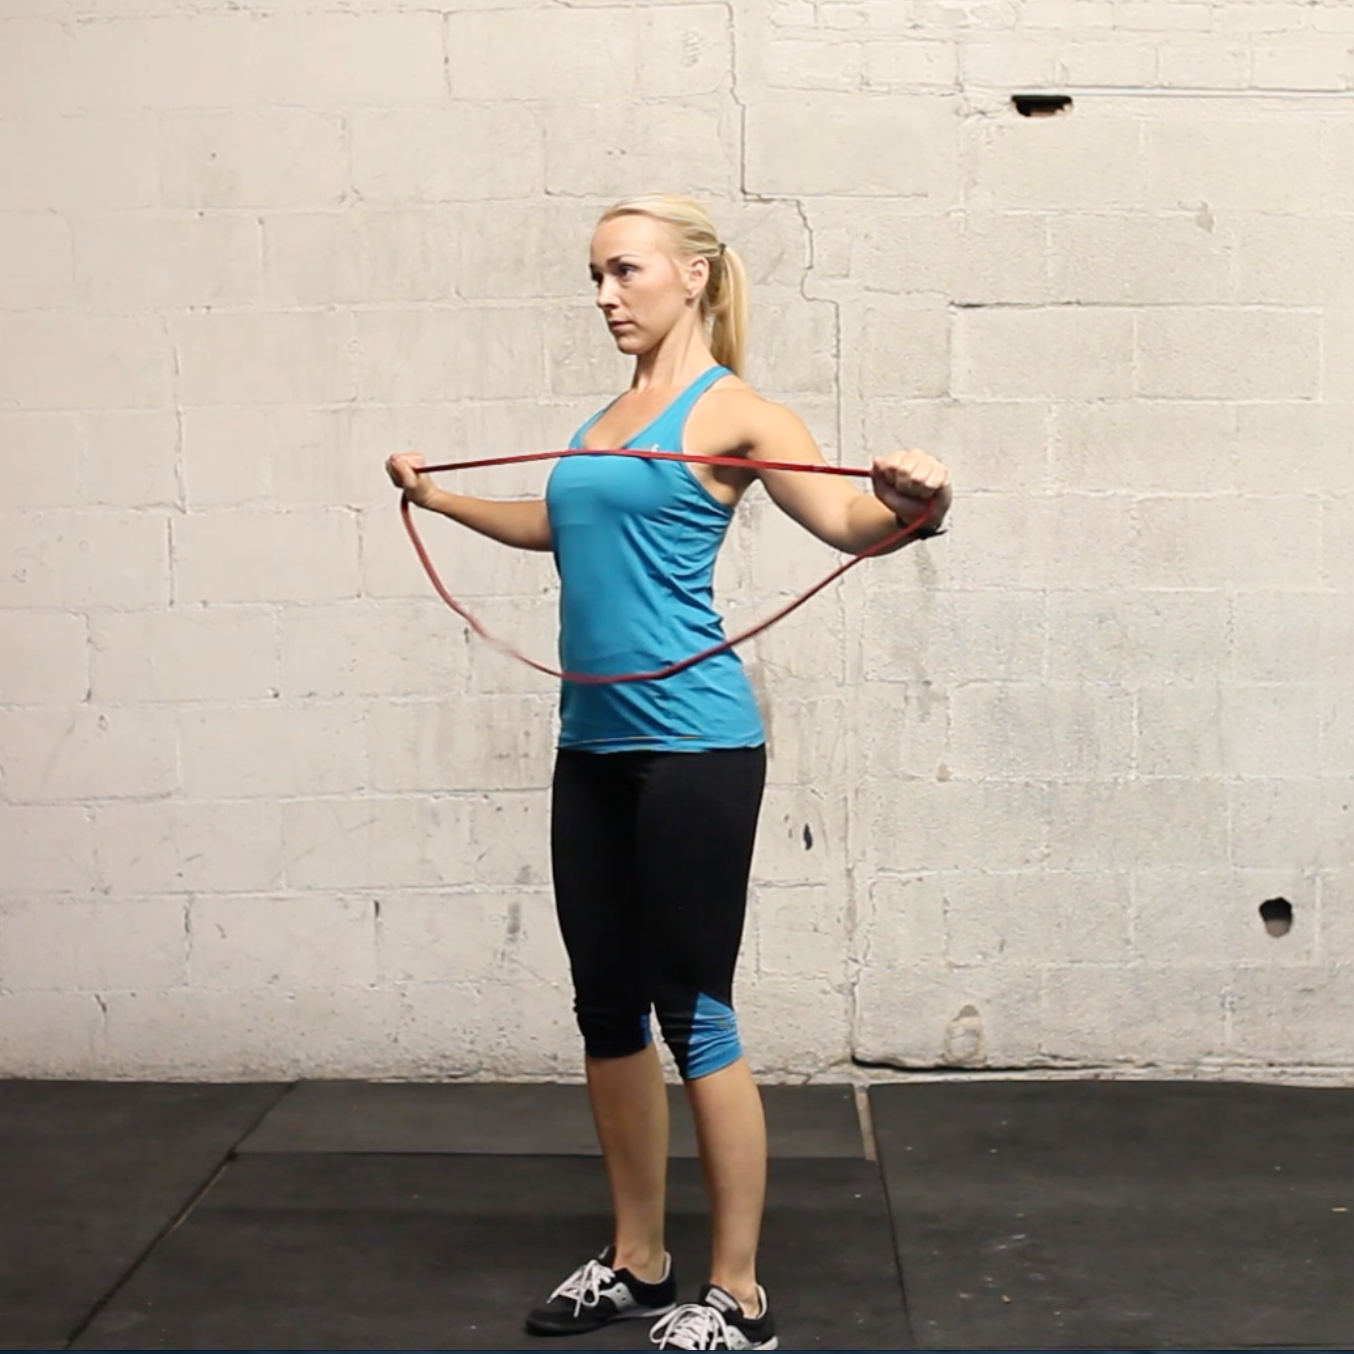 Warm up superset: band pullapart + lunge